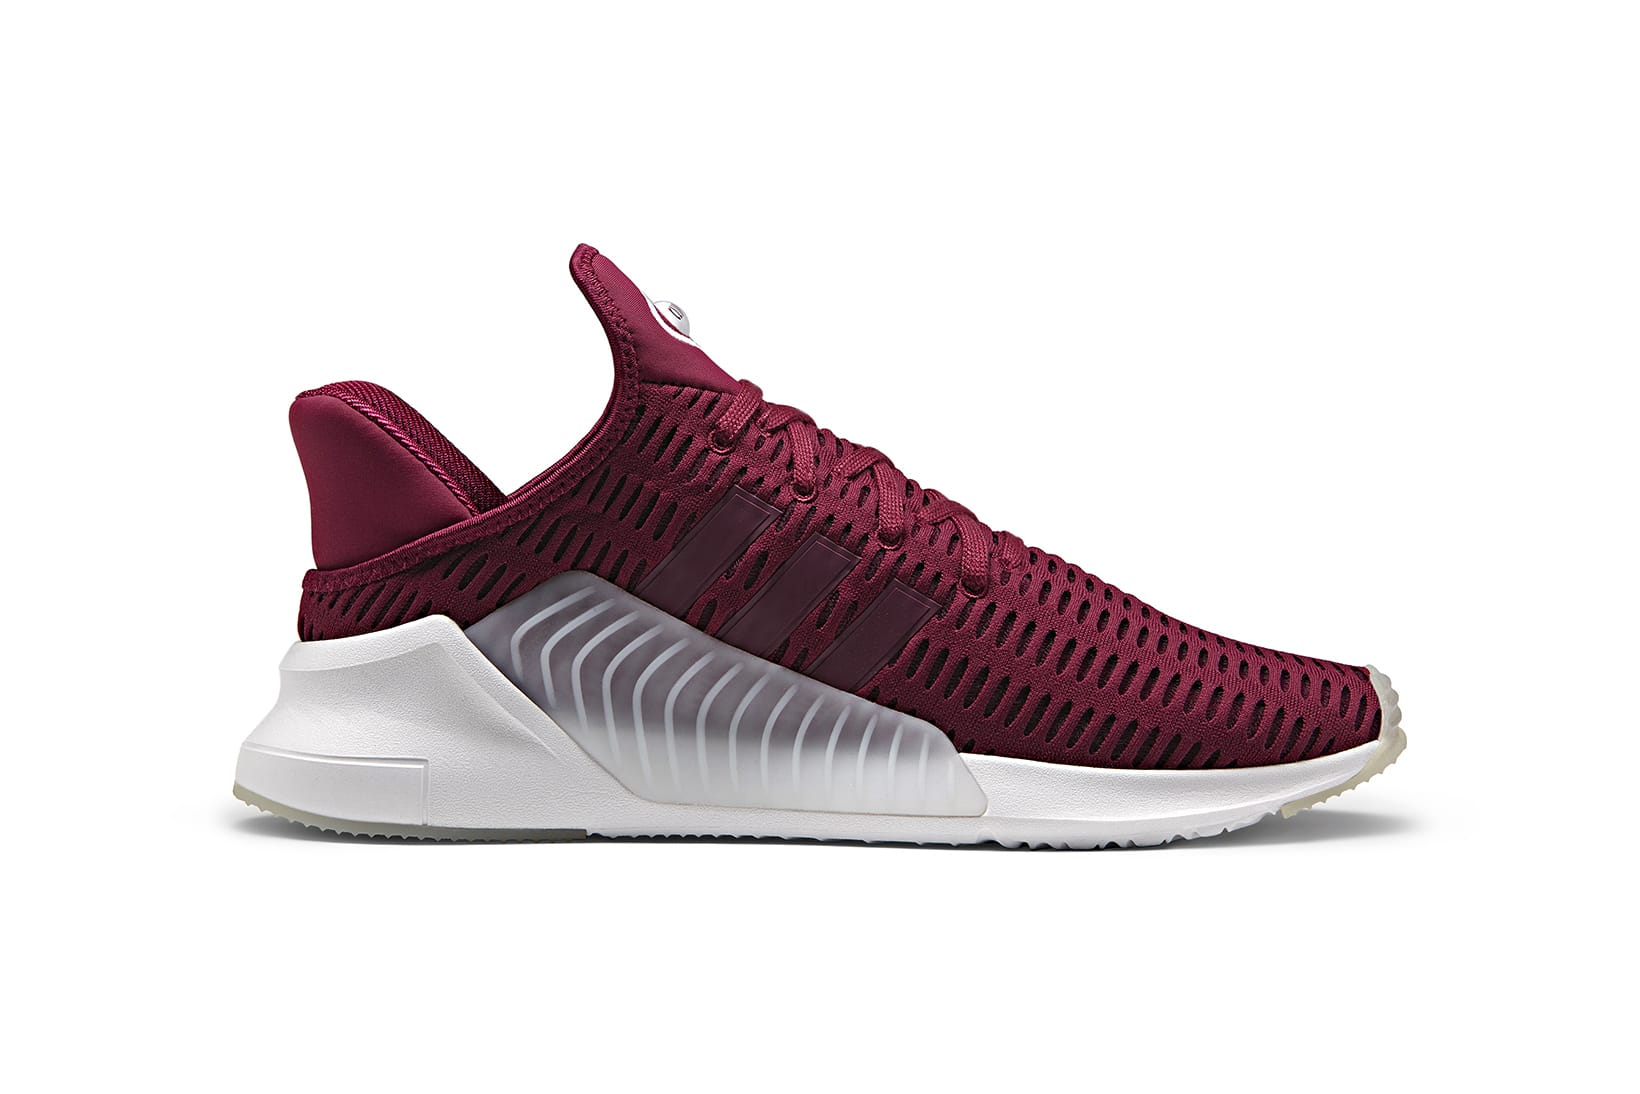 adidas climacool shoes release date